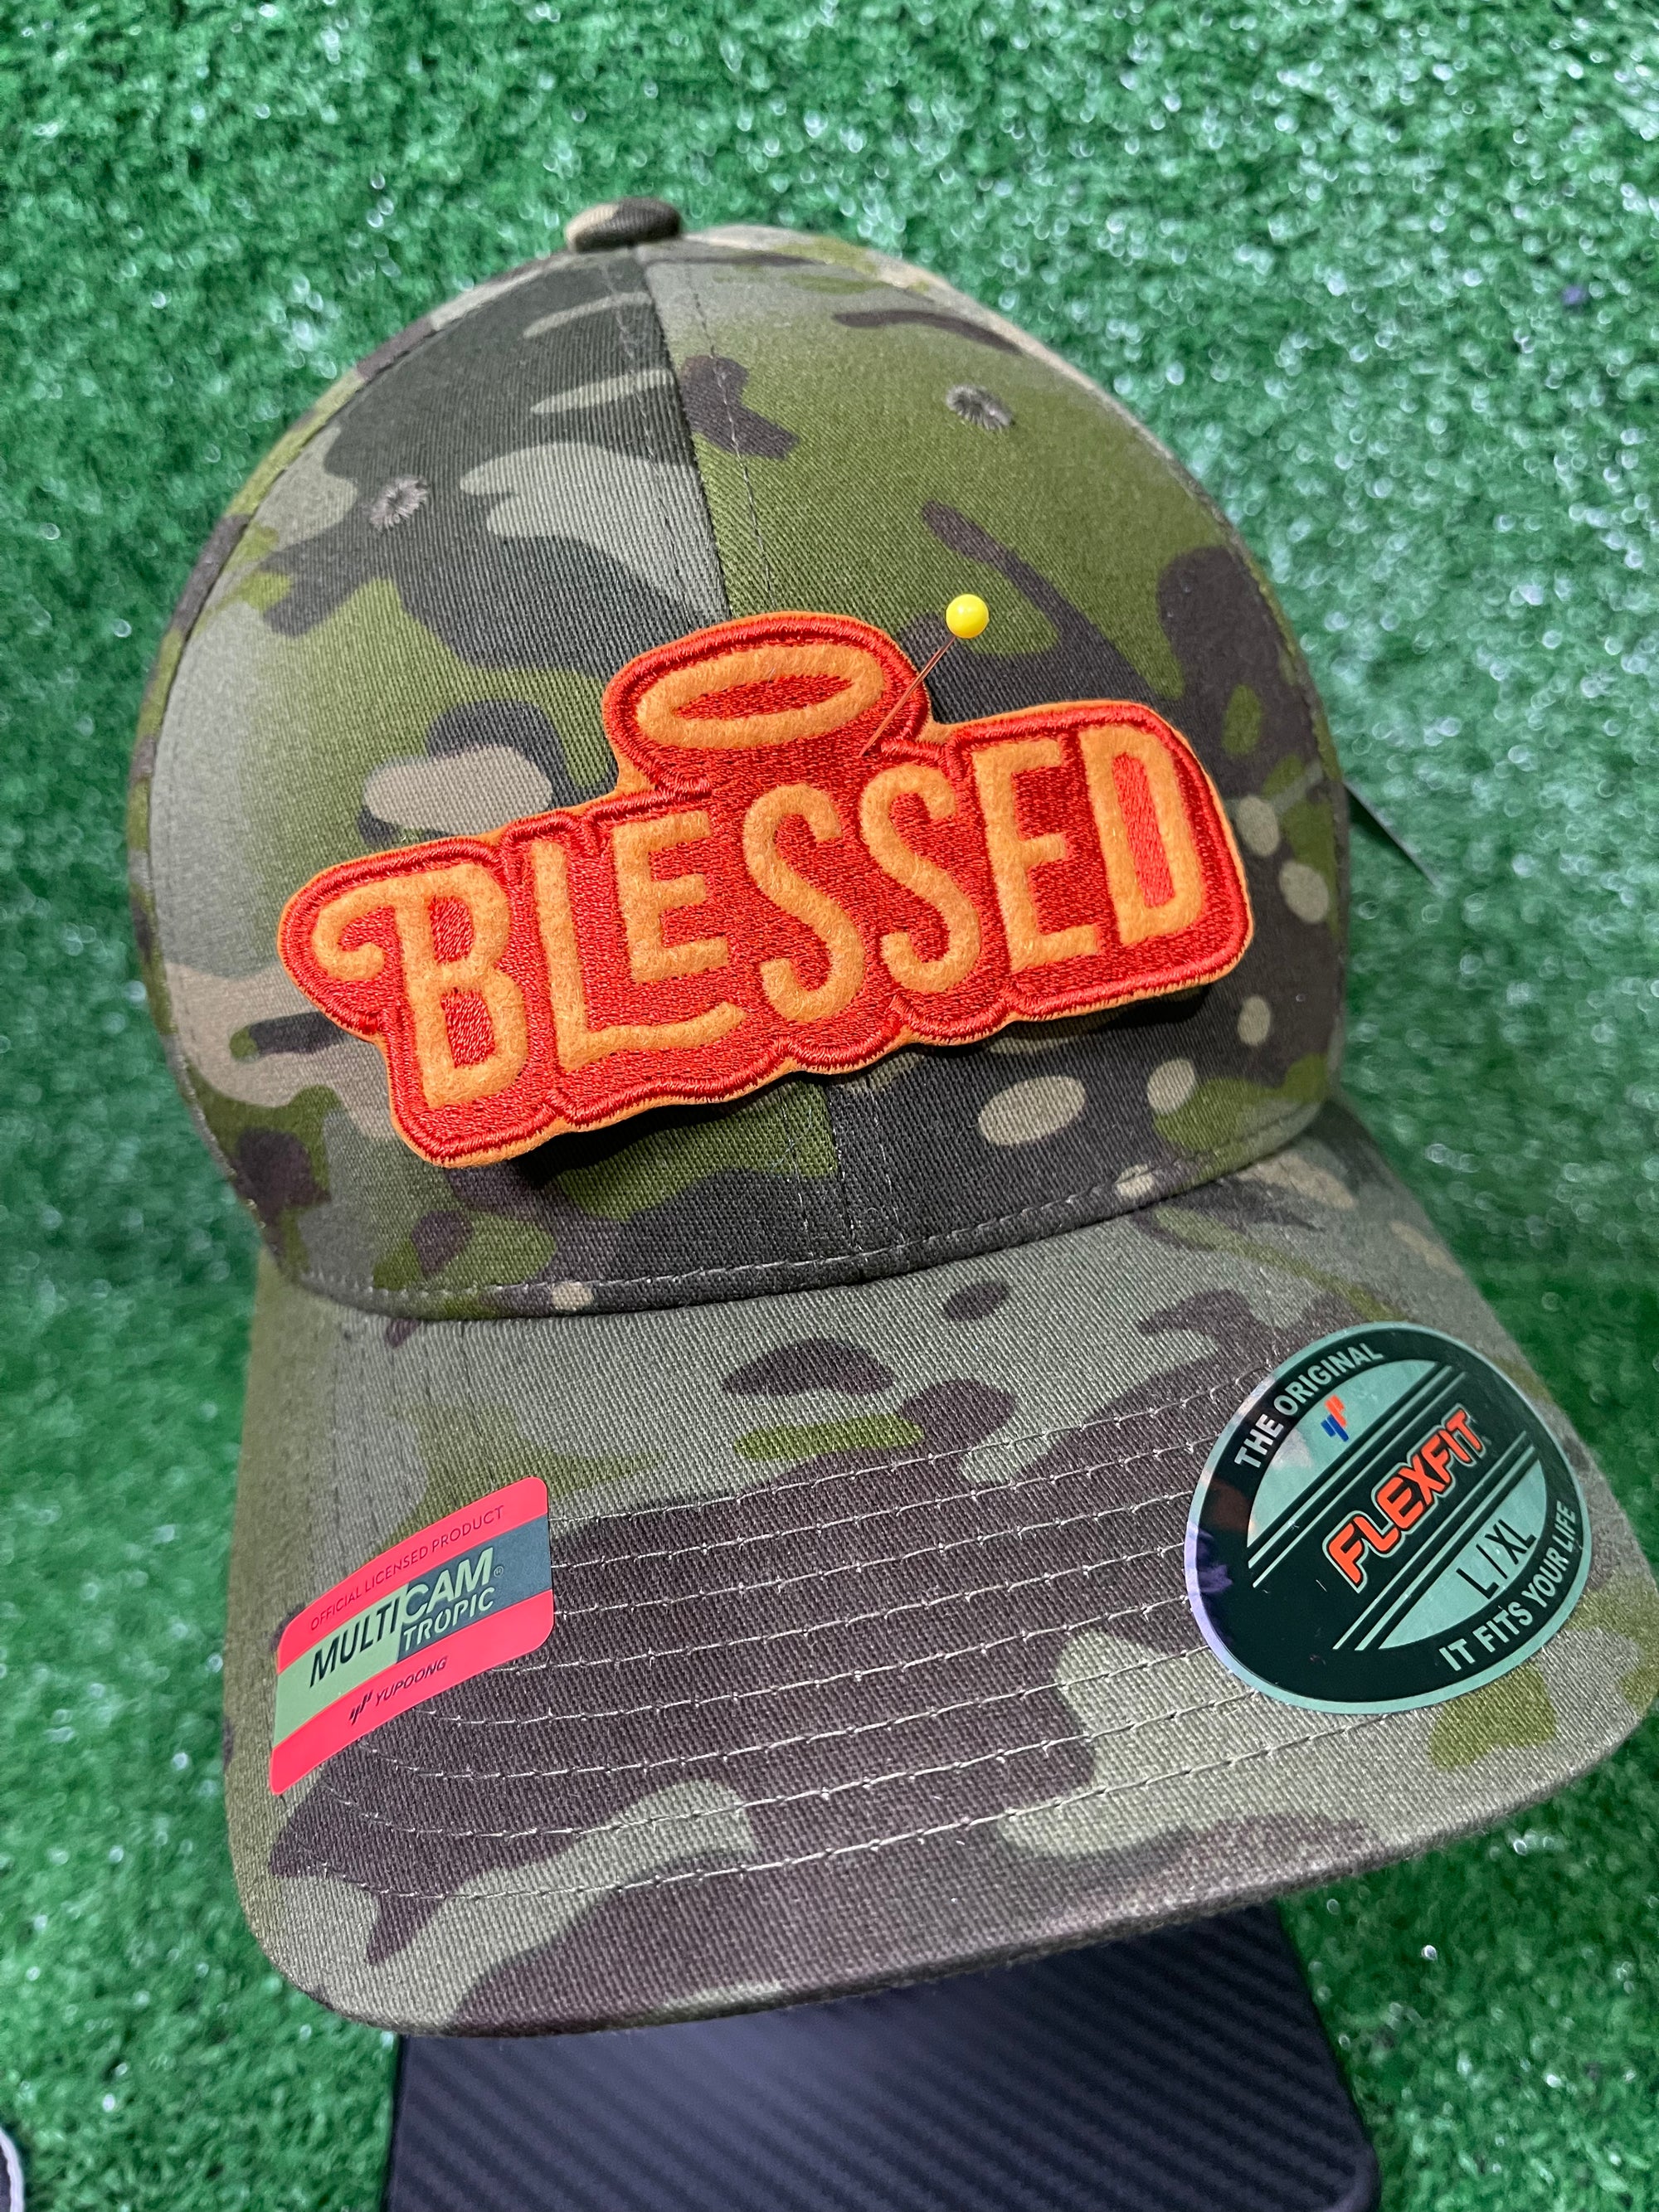 Blessed Embroidered Iron-on Patch